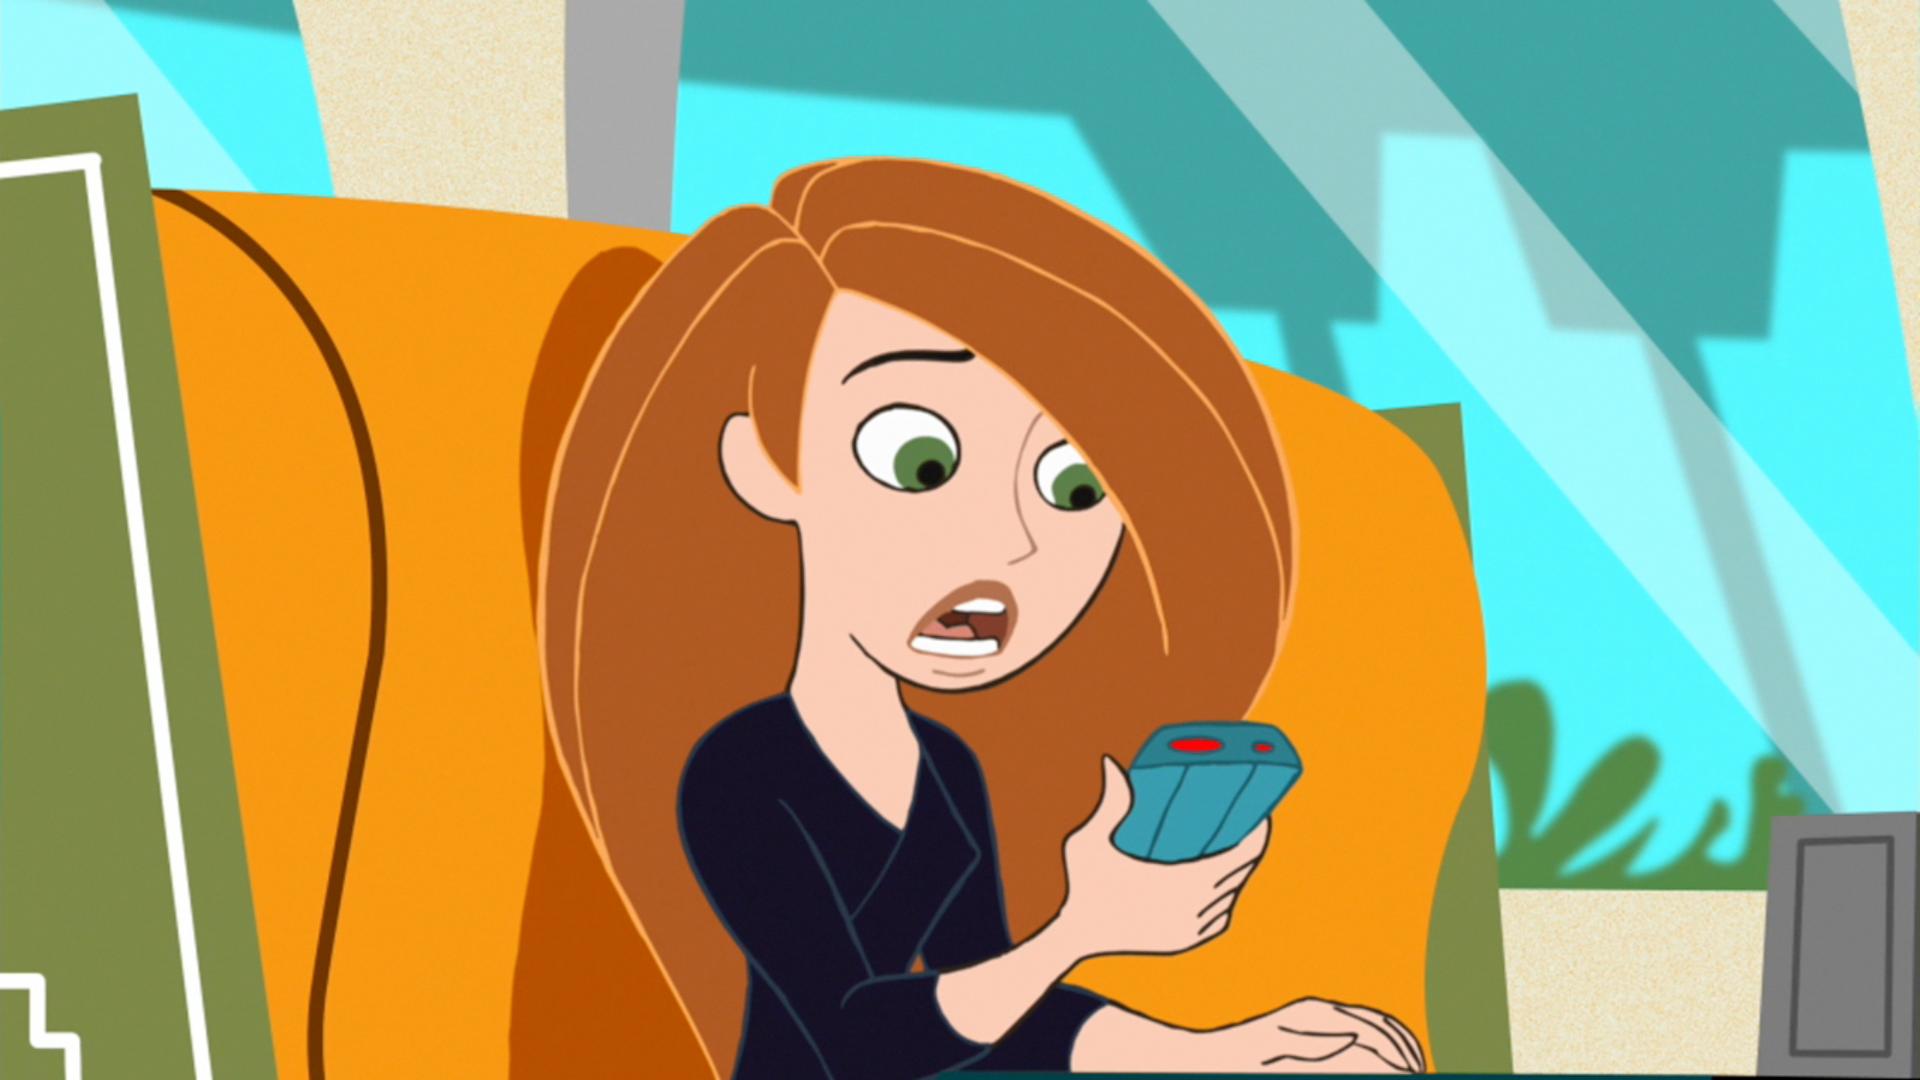 Clothes Minded Screen Captures Kim Possible Fan World.